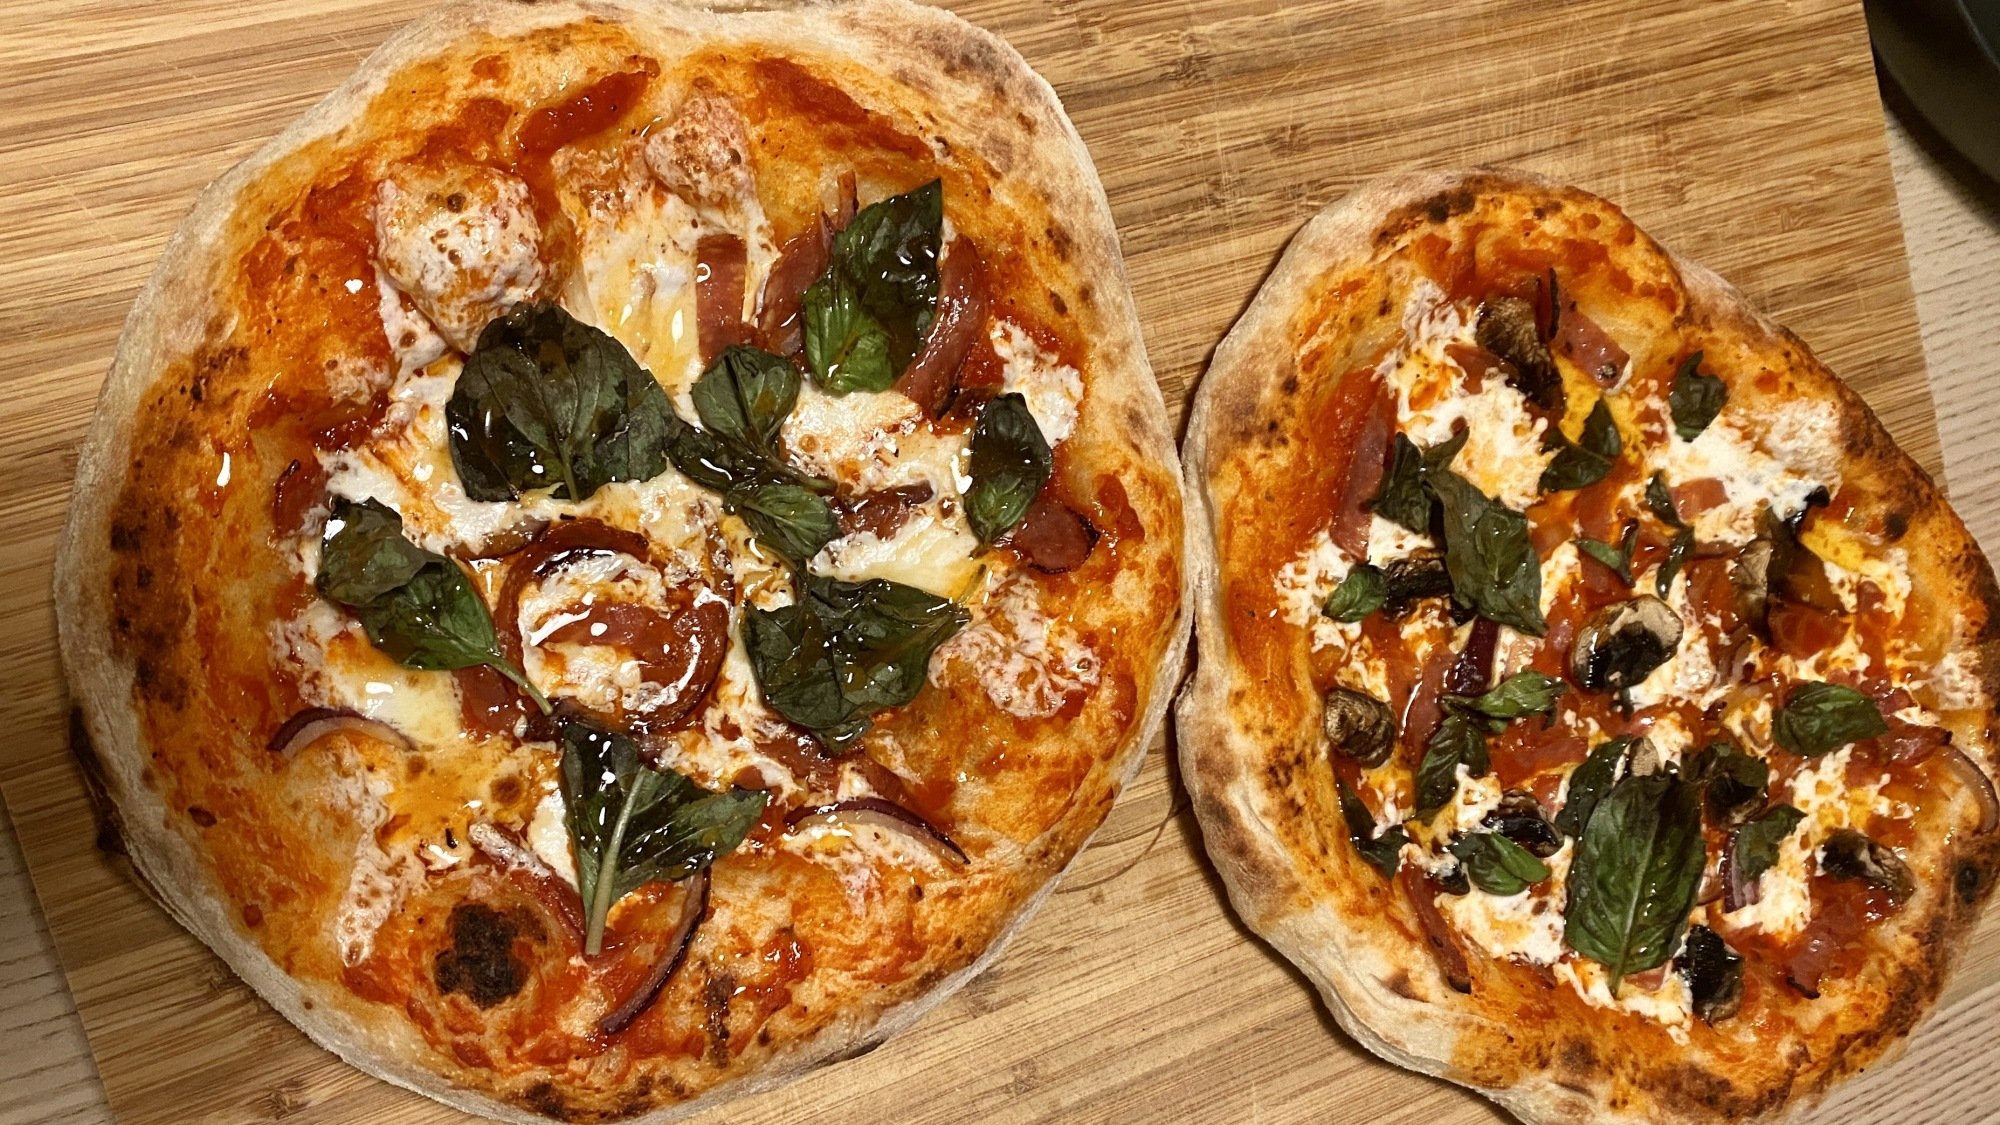 Two perfectly cooked, golden-brown pizzas on a wood cutting board